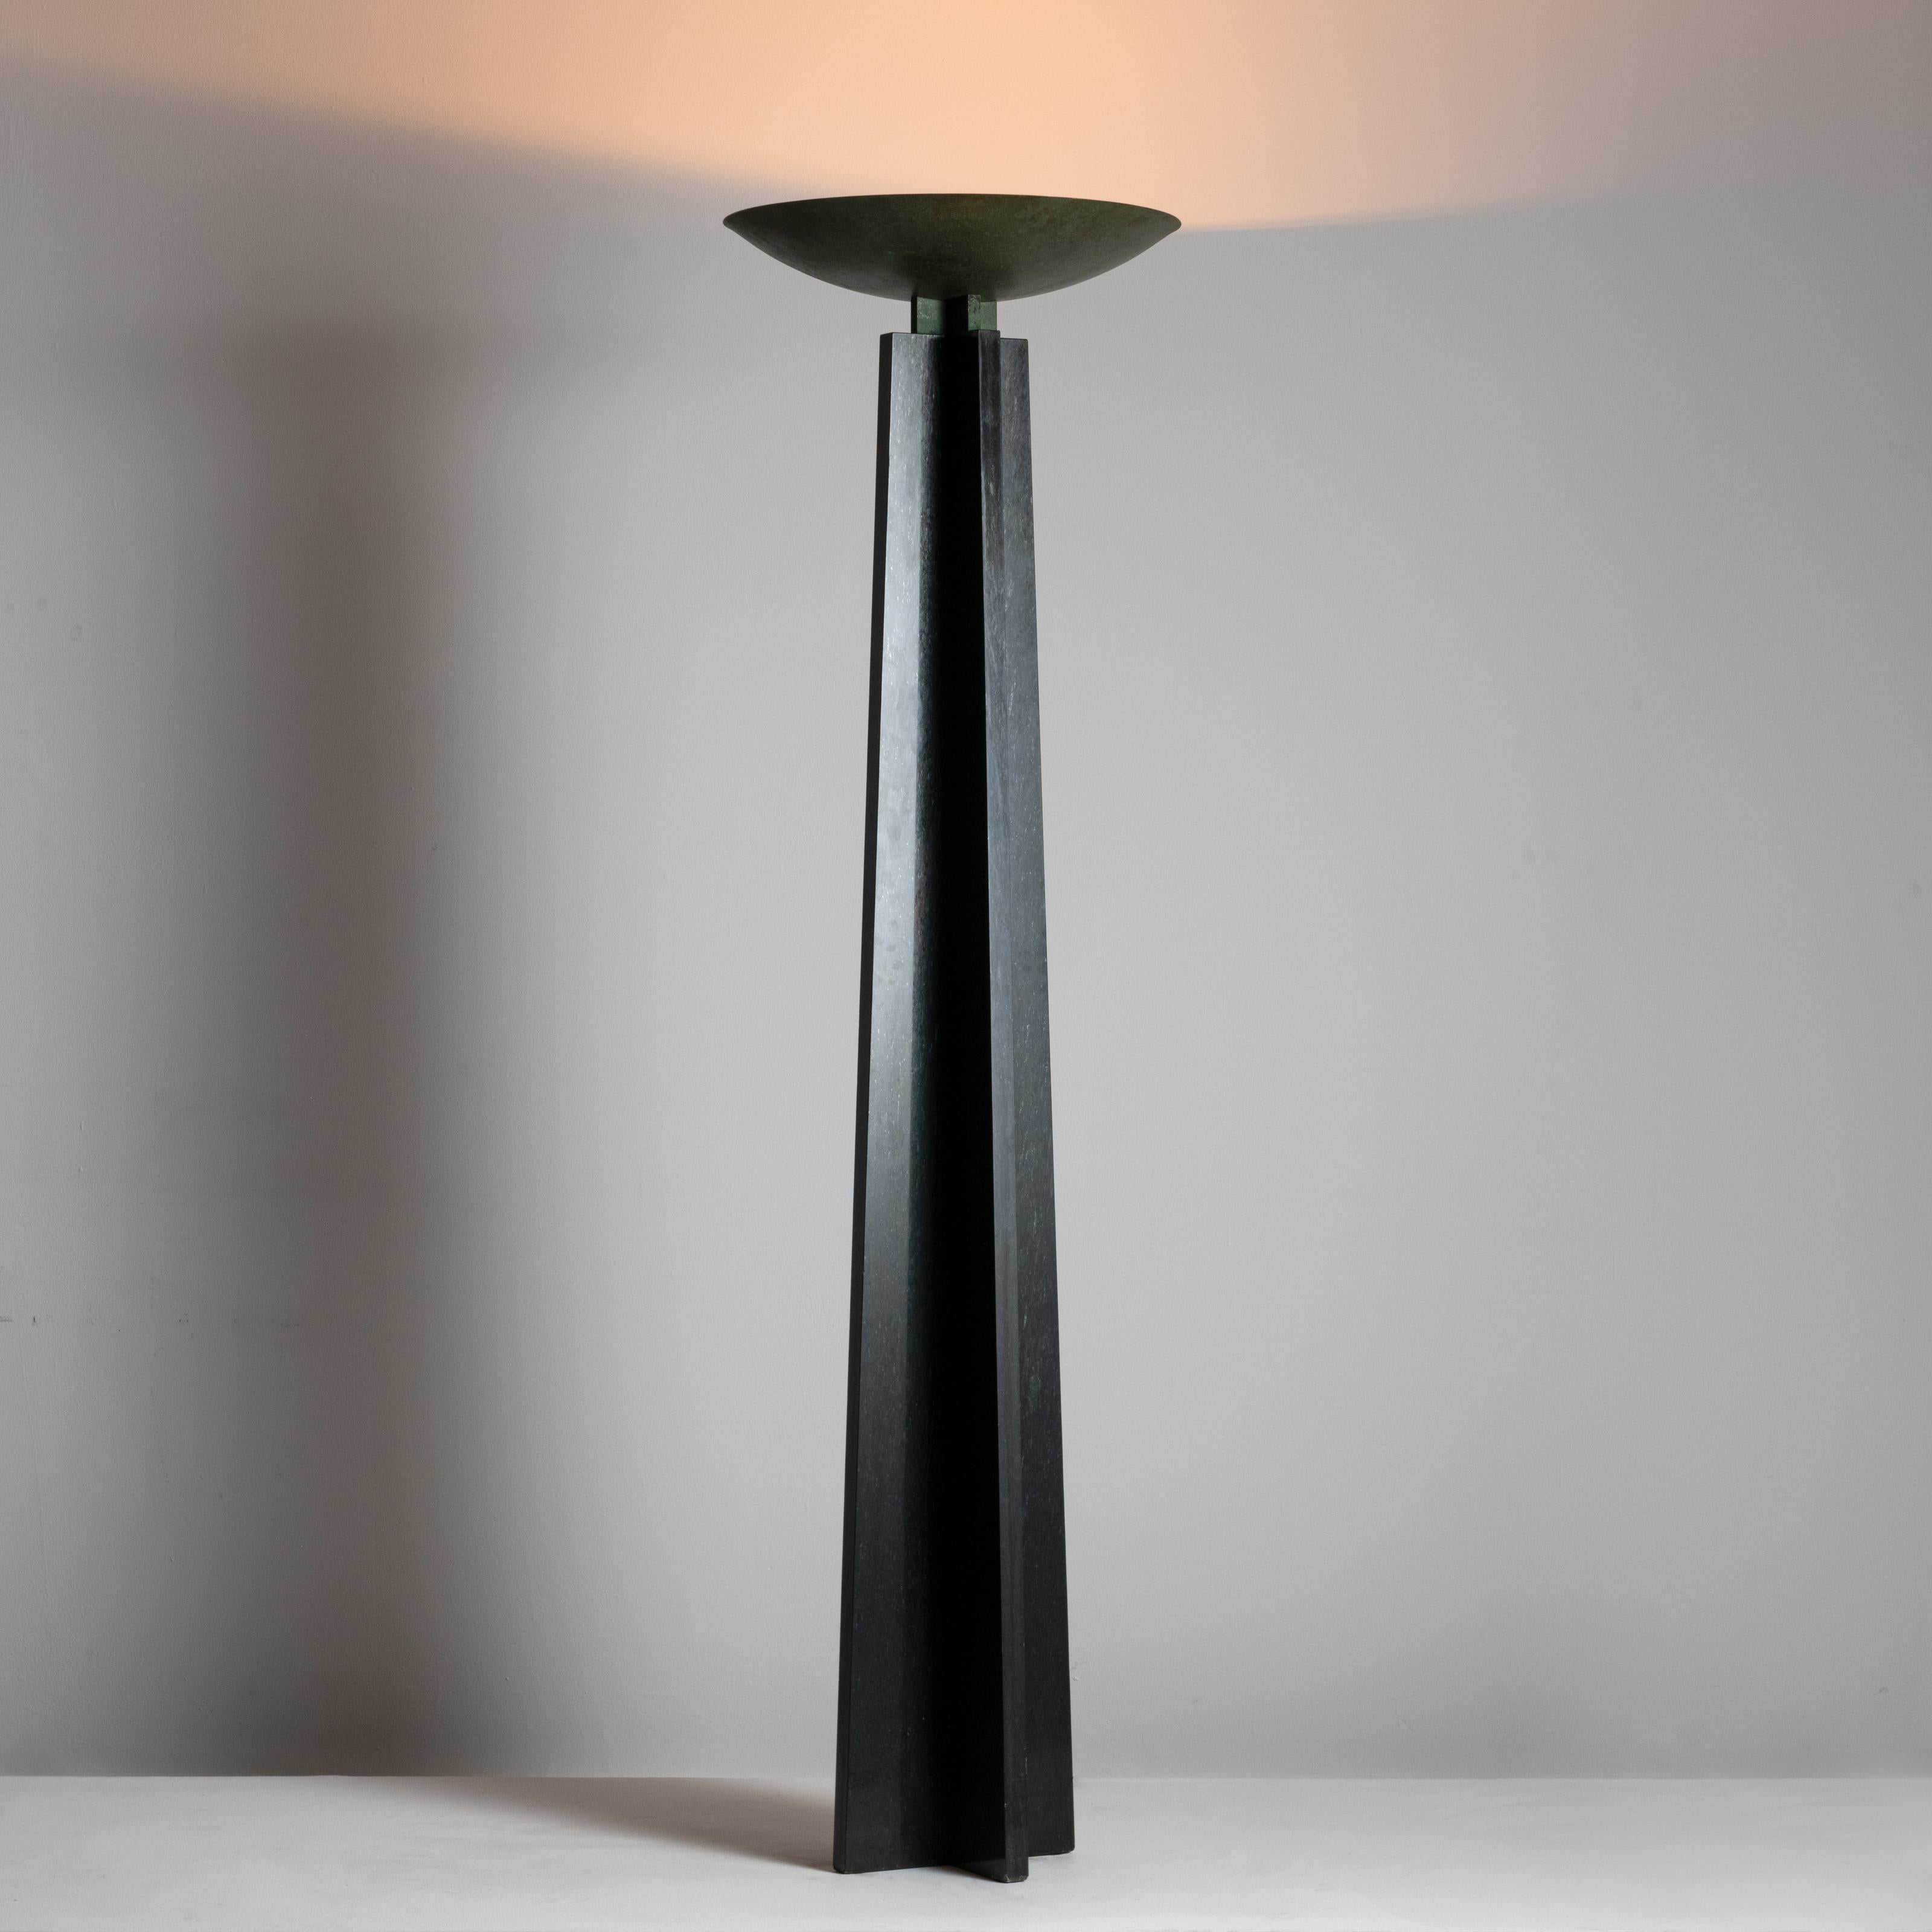 Wagneriana marble floor lamp by Lella and Massimo Vignelli. Designed and manufactured in Italy, 1986. A monolithic black marble floor lamp adorned with a brass bowl-shaped shade. The shade has been expertly patinated with a verde finish. Floor lamp